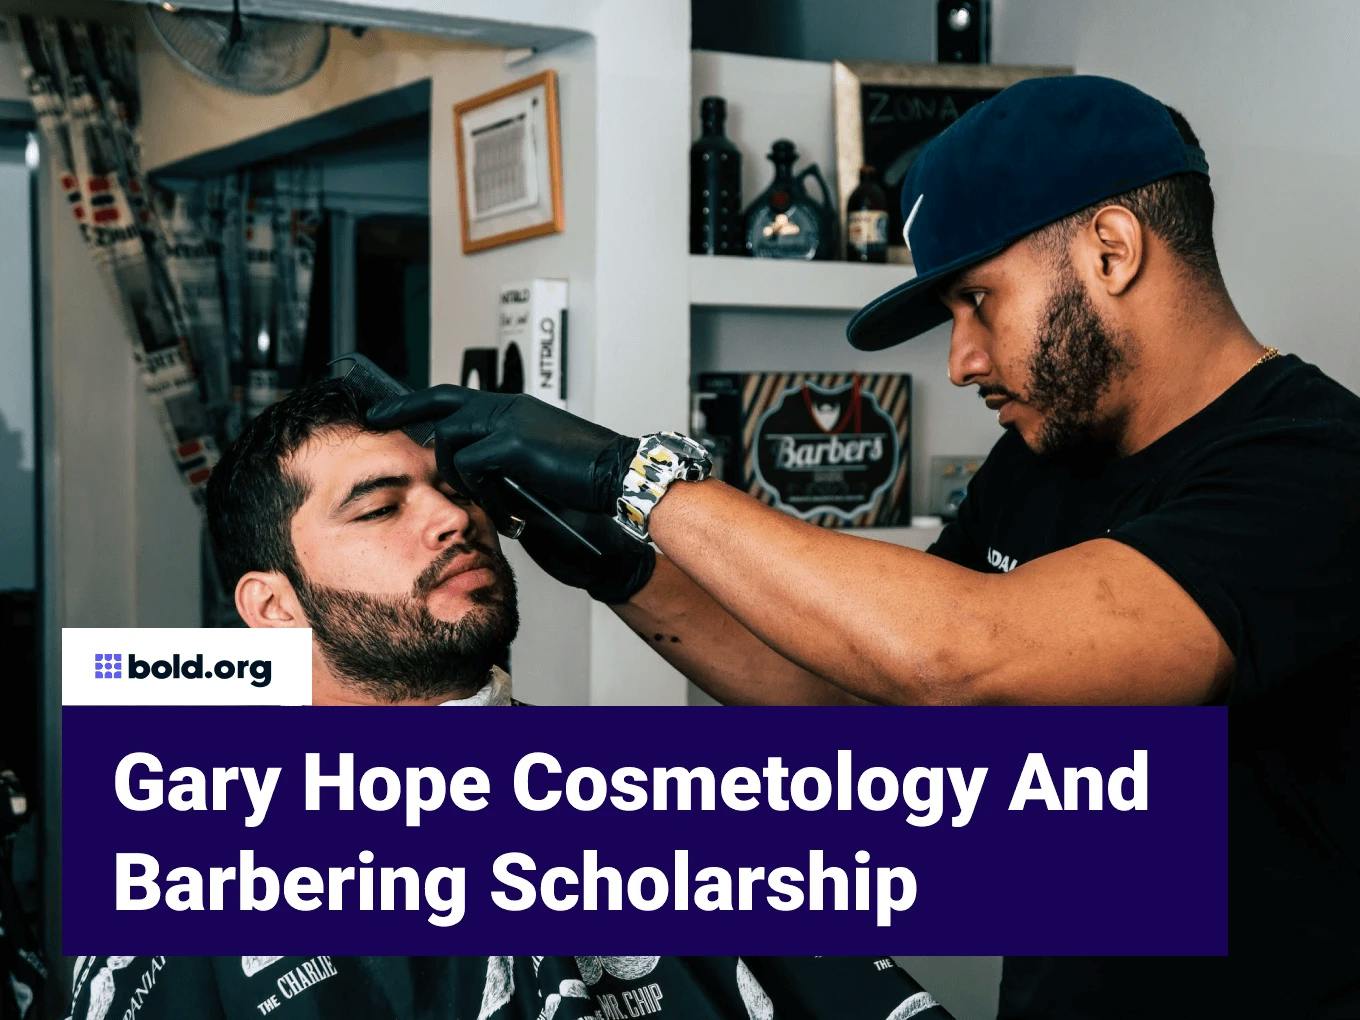 Gary Hope Cosmetology And Barbering Scholarship